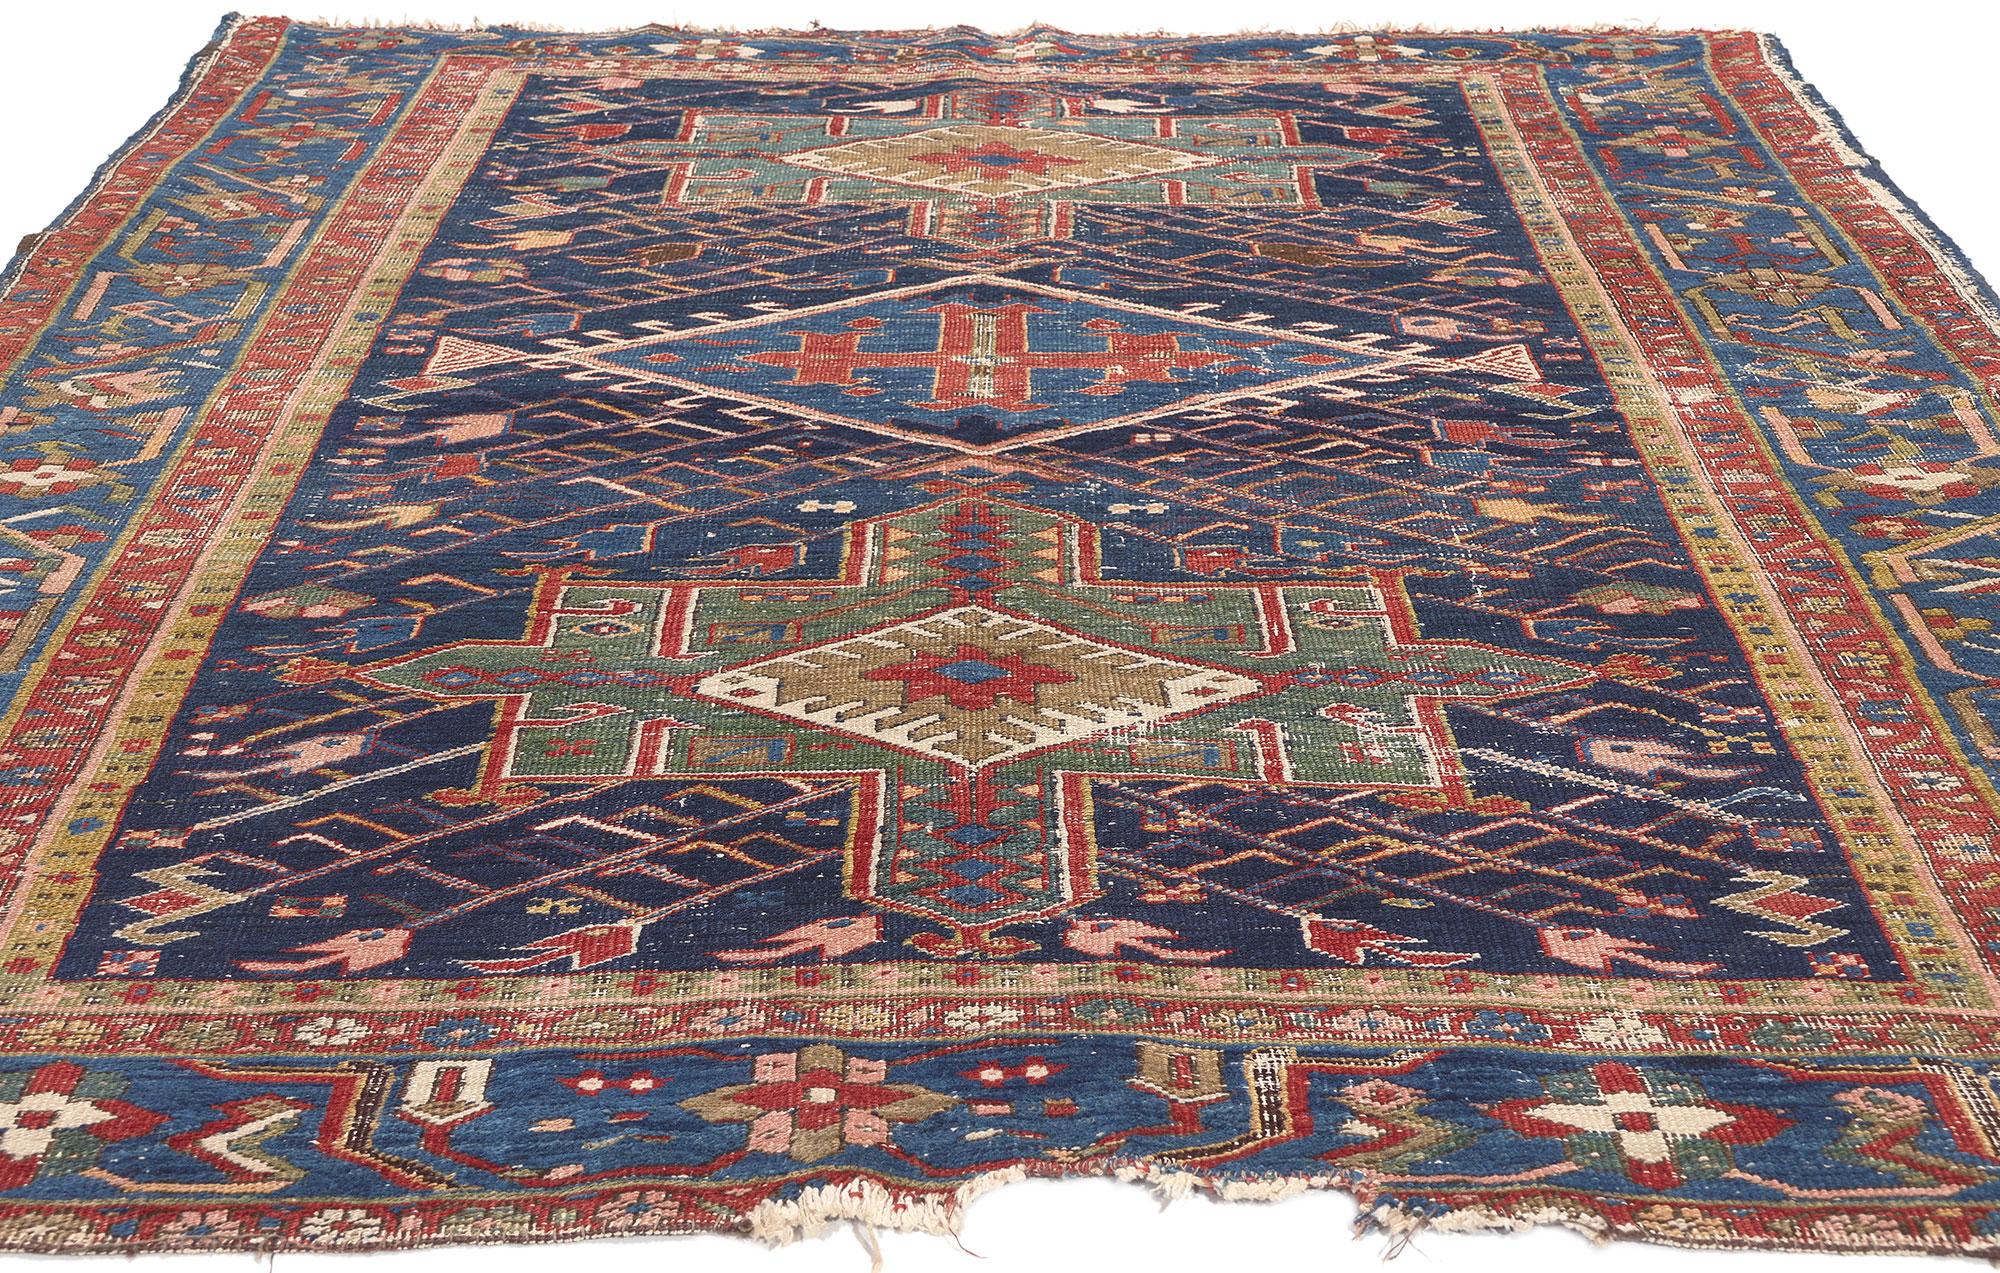 Hand-Knotted Antique Worn Persian Serapi Rug, Rugged Beauty Meets Modern Masculine For Sale